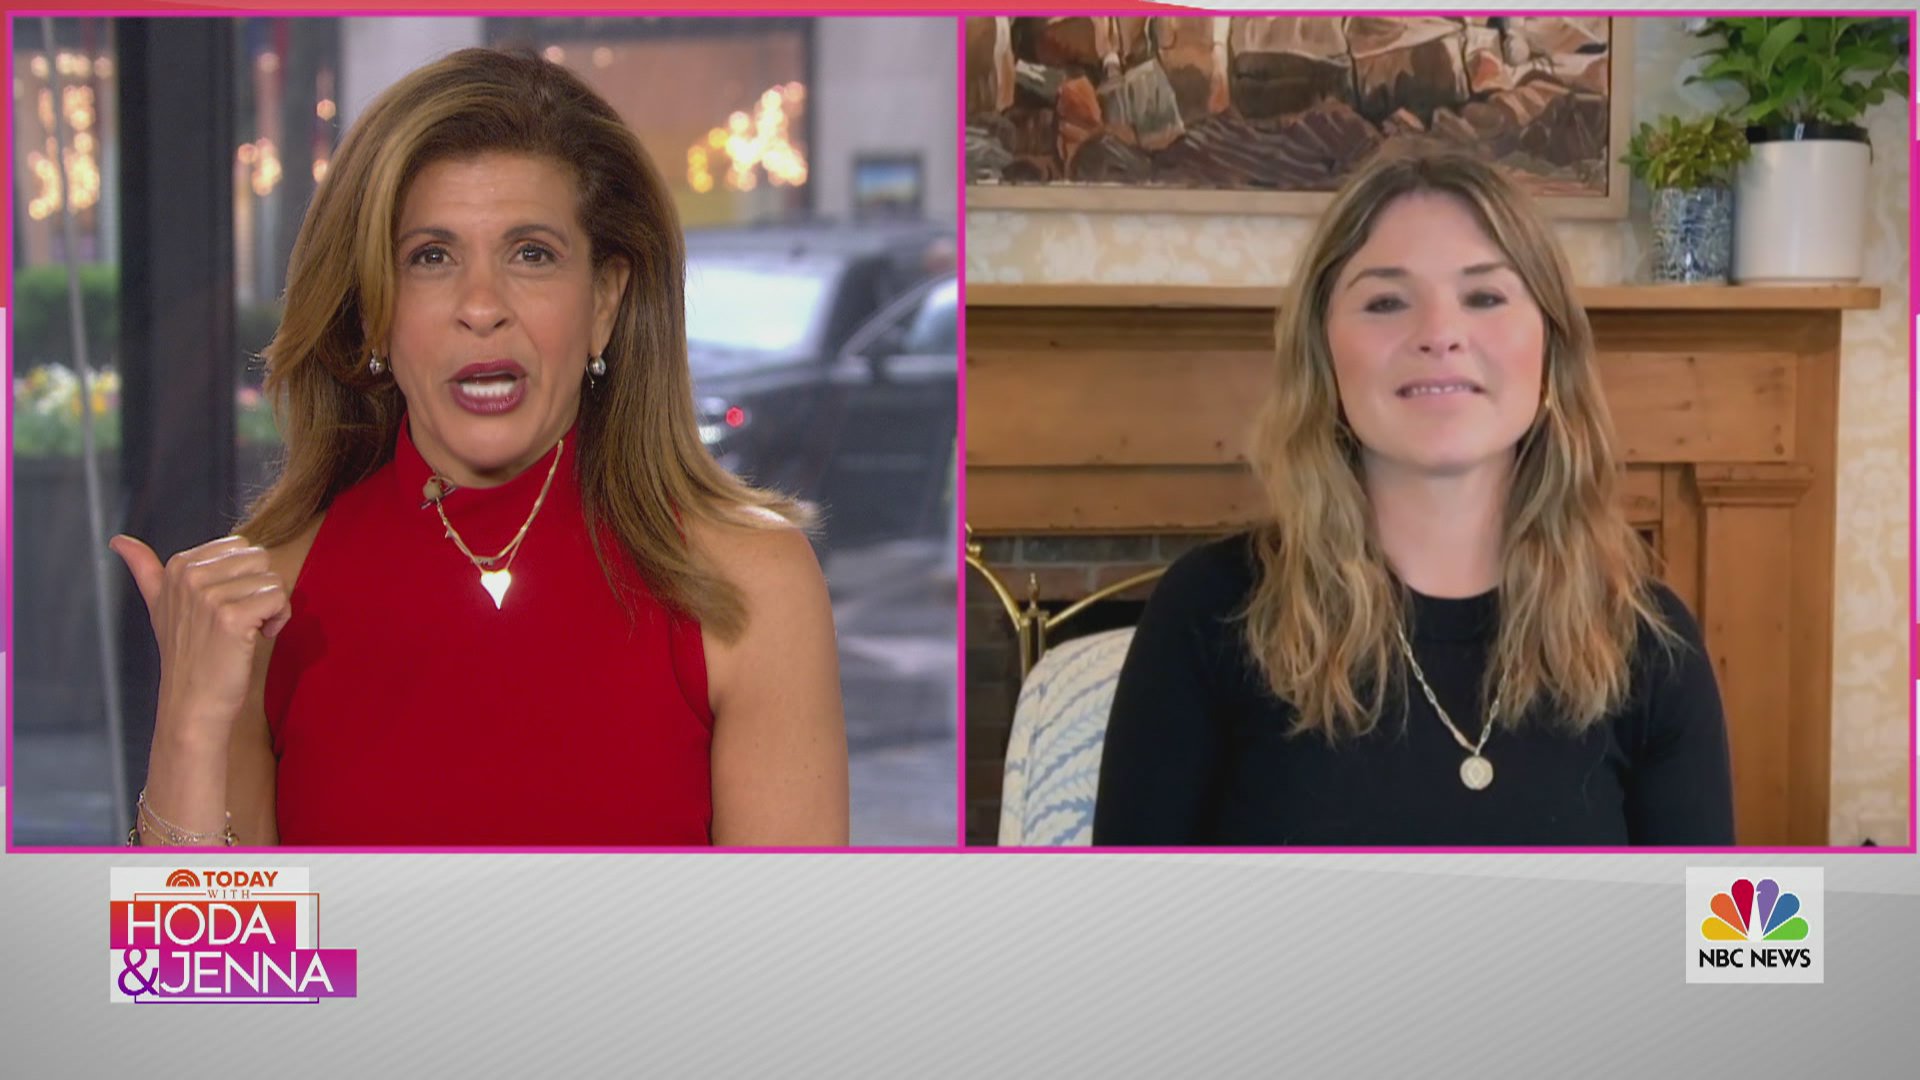 Watch TODAY Episode: Hoda and Jenna - May 1, 2020 - NBC.com